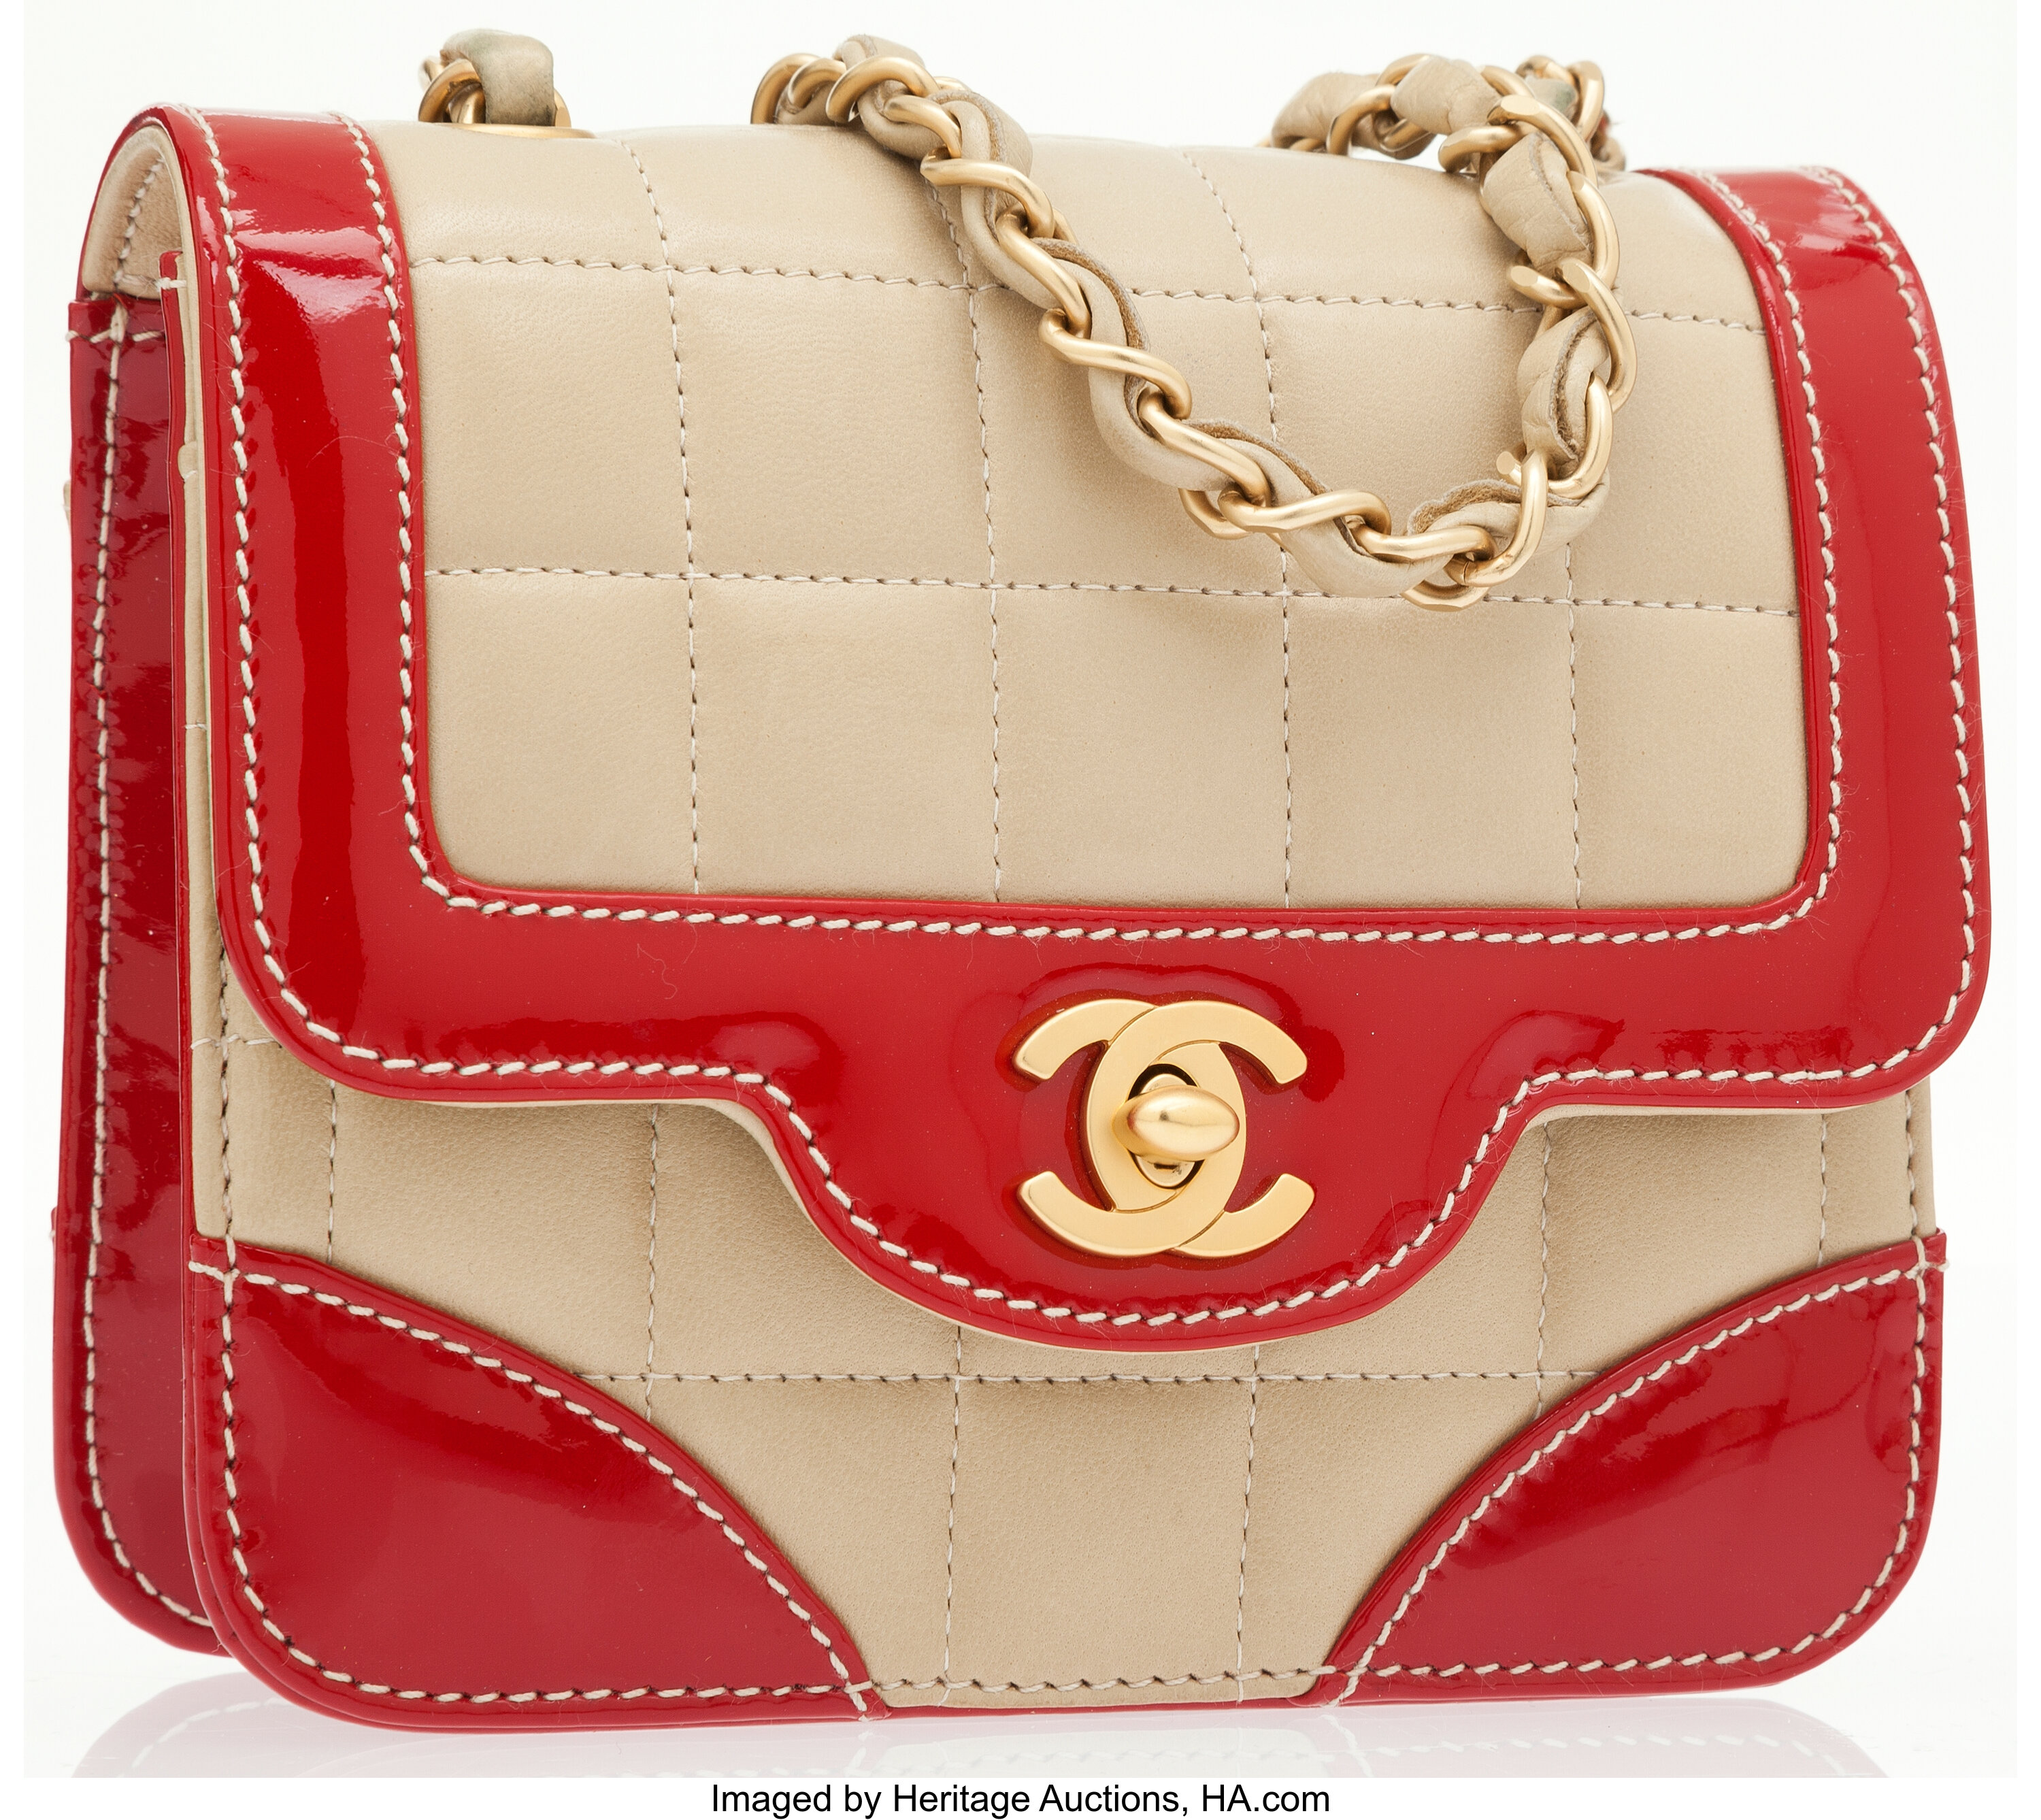 CHANEL Chocolate Bar Small Patent Leather Flap Shoulder Bag Red